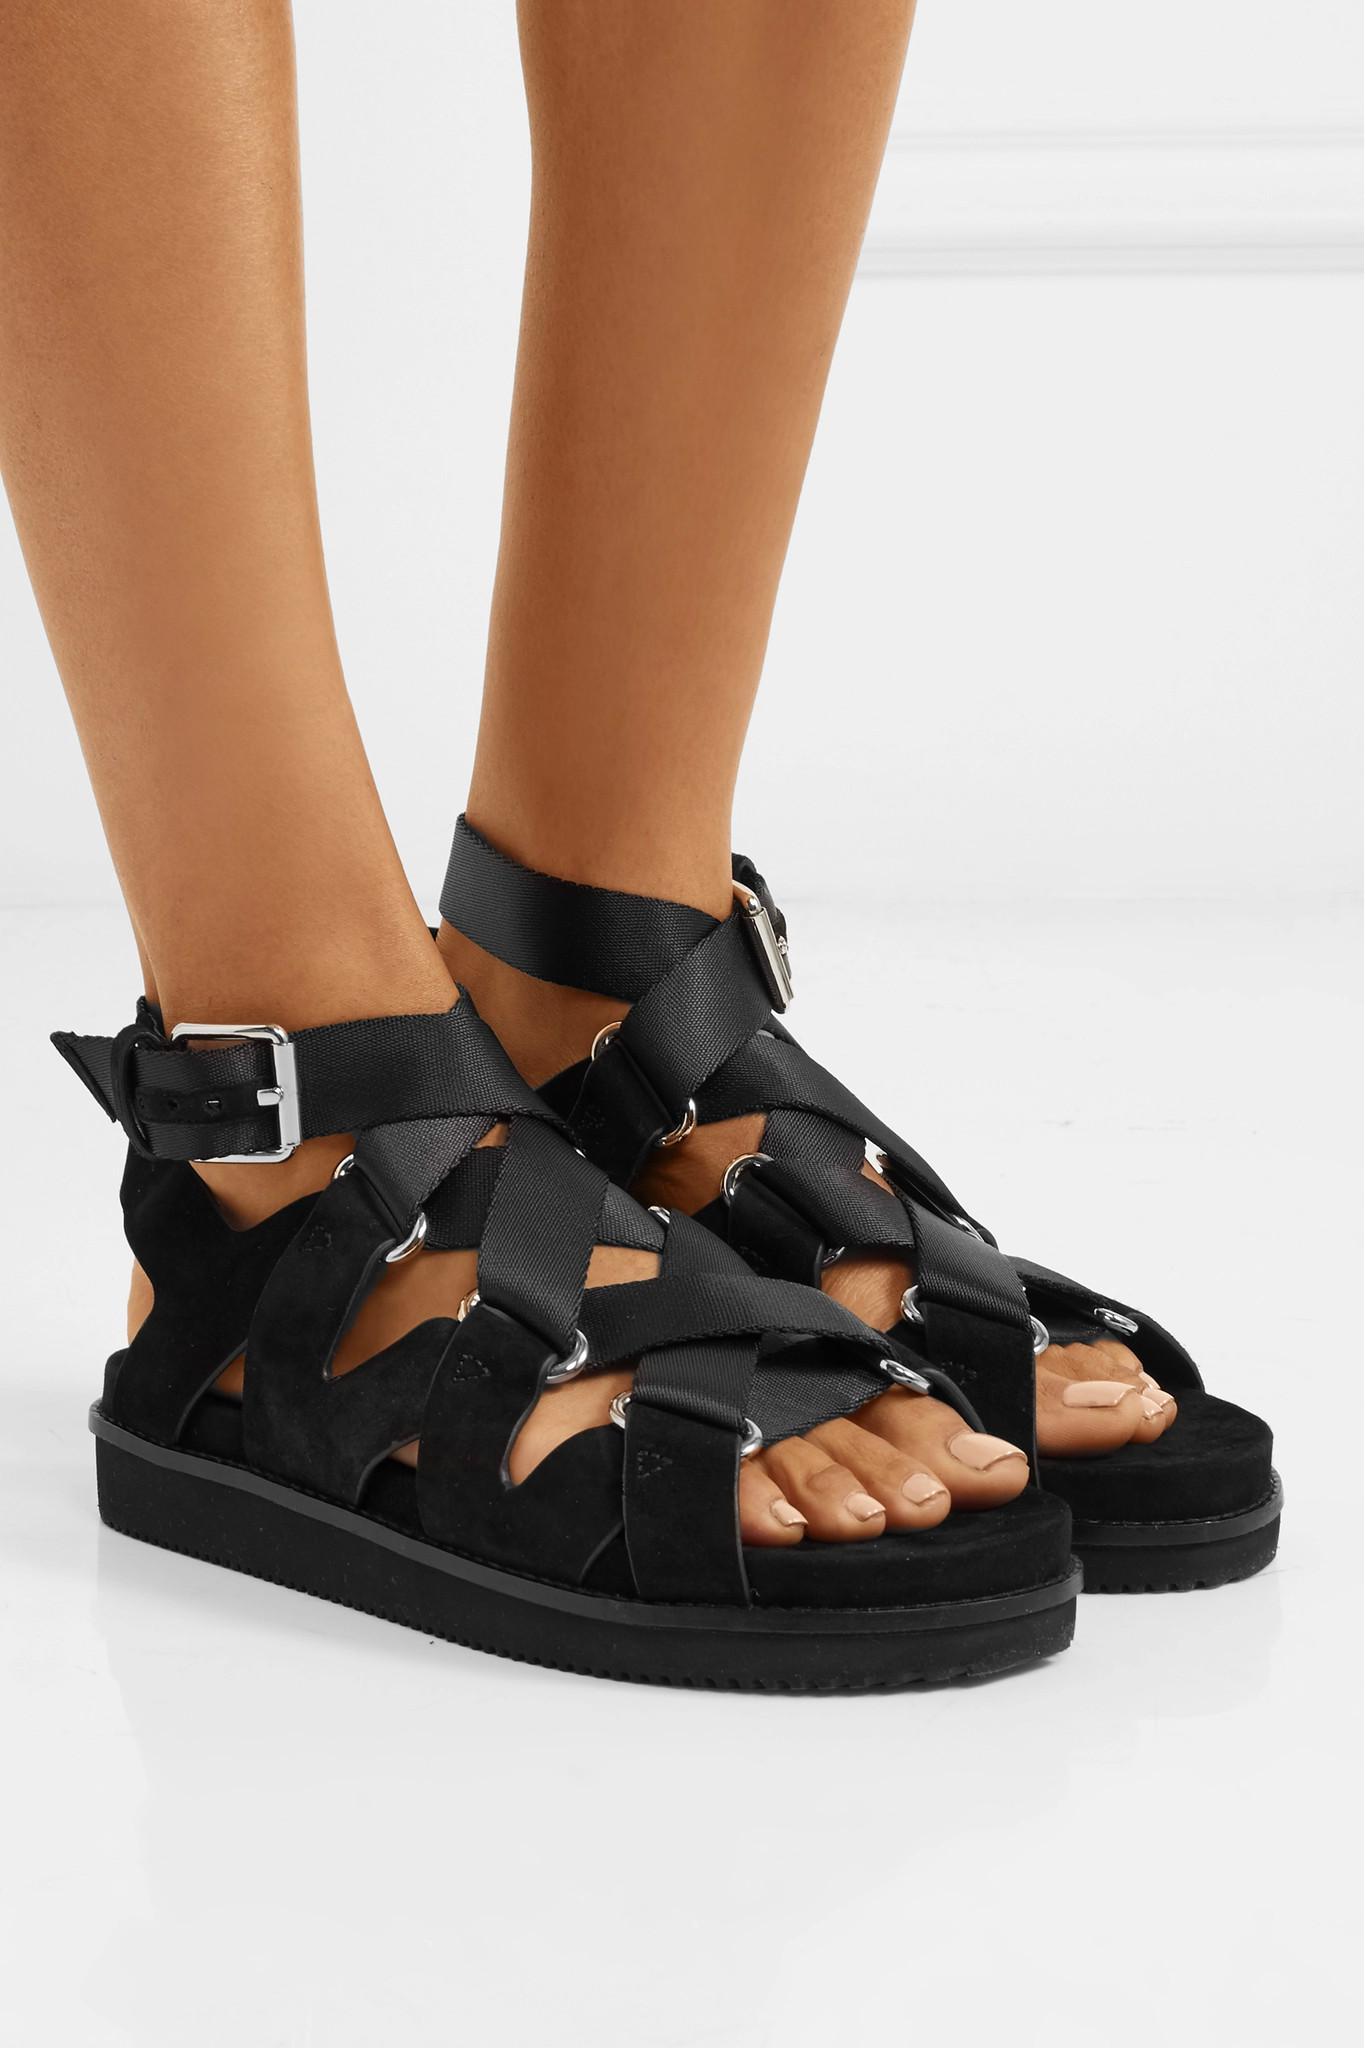 Alexander Wang Natalie Suede And Canvas Sandals in Black - Lyst